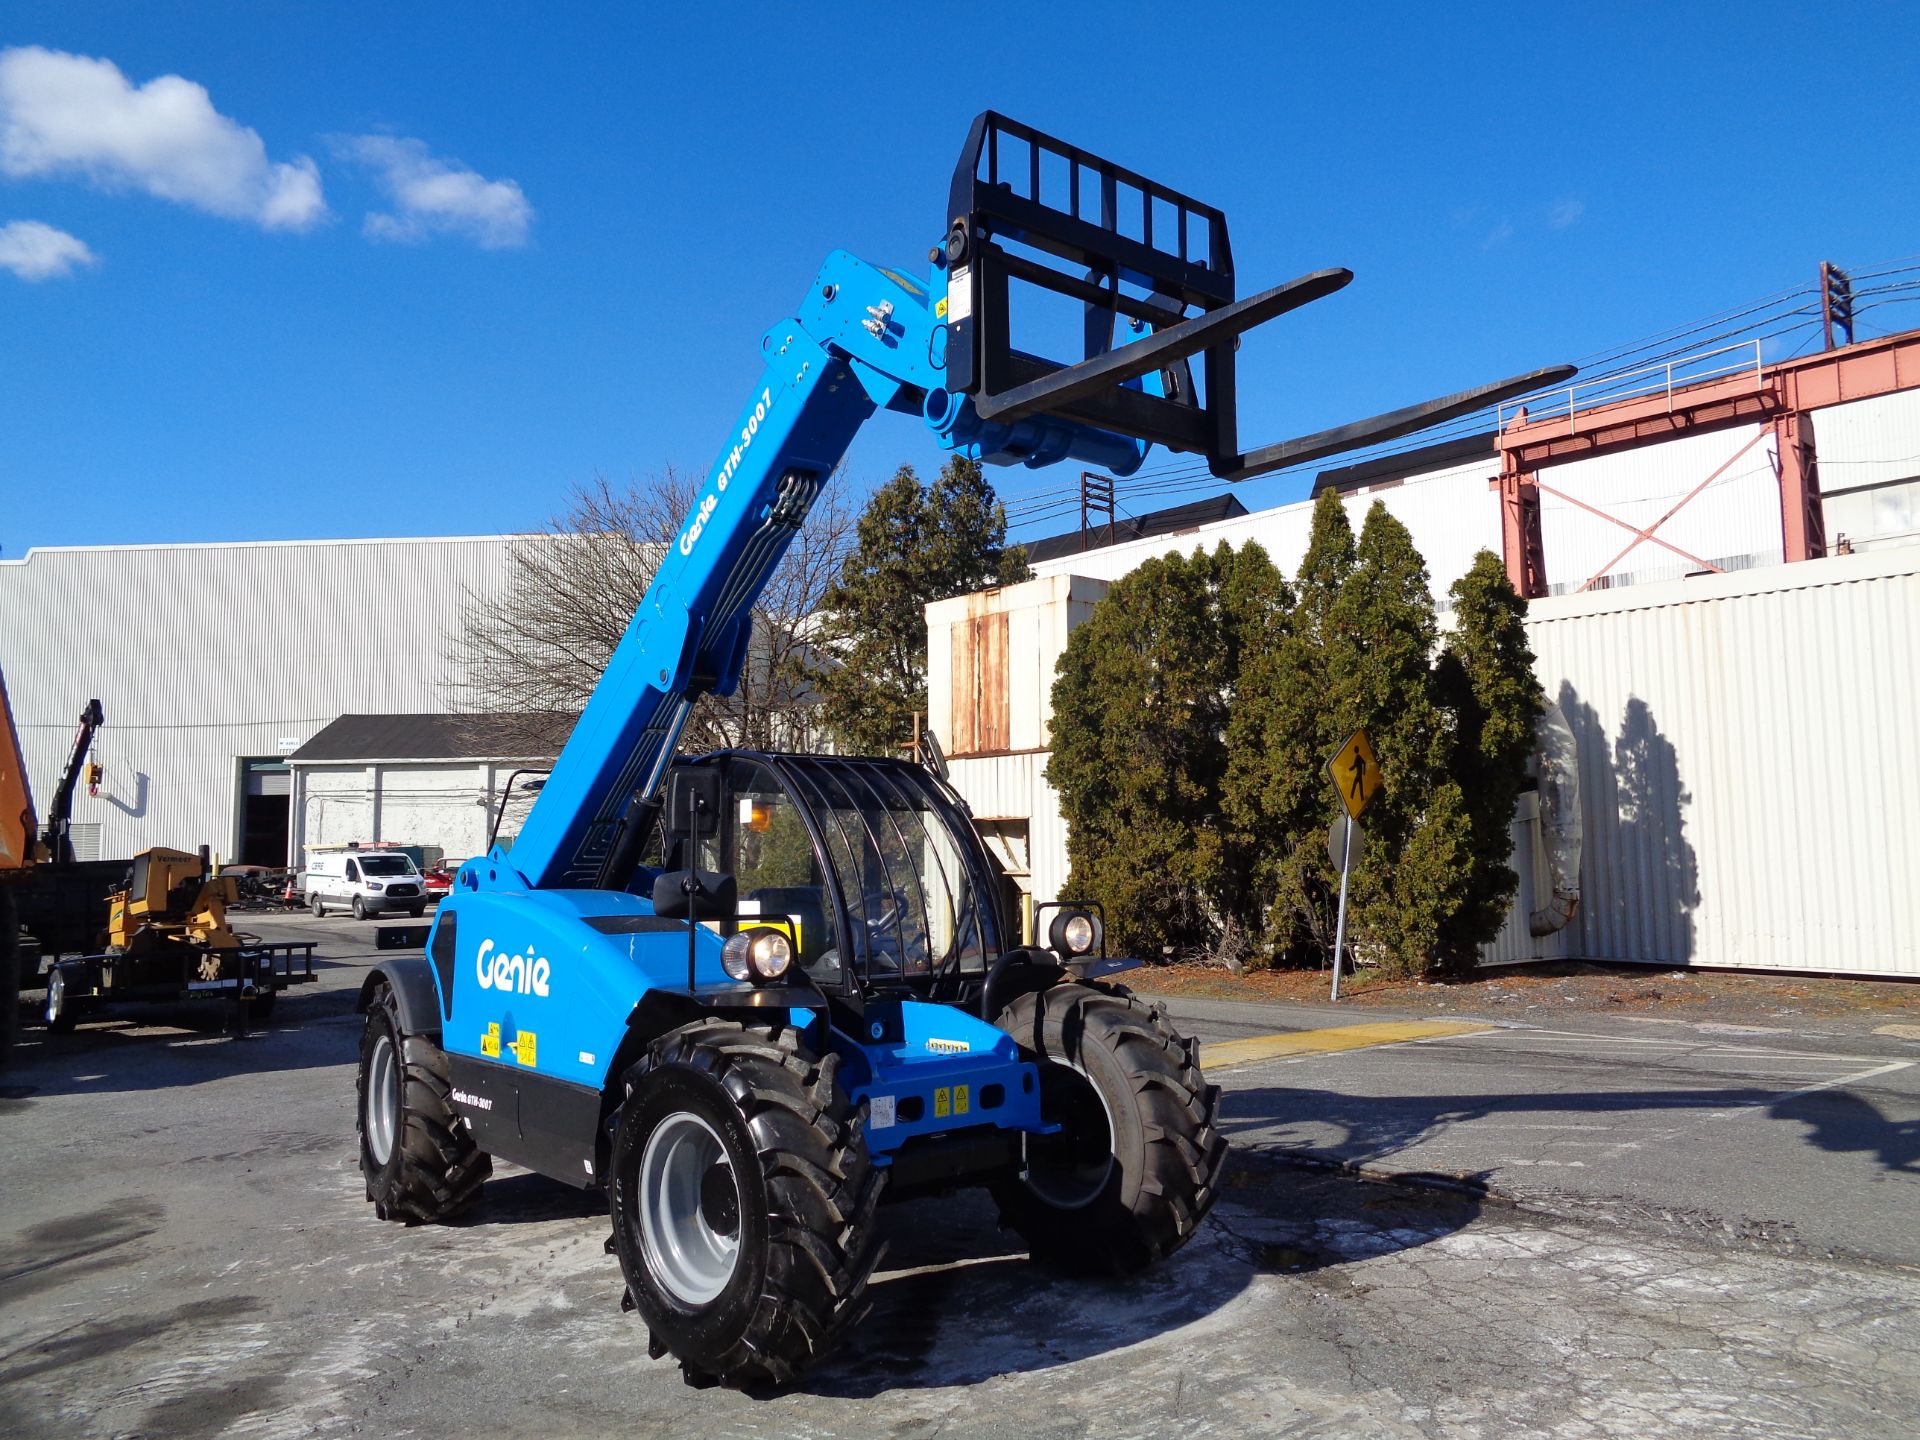 New Unused 2018 Genie GTH3007 Telescopic Forklift 6,600 lbs - Enclosed Cab - Image 6 of 23